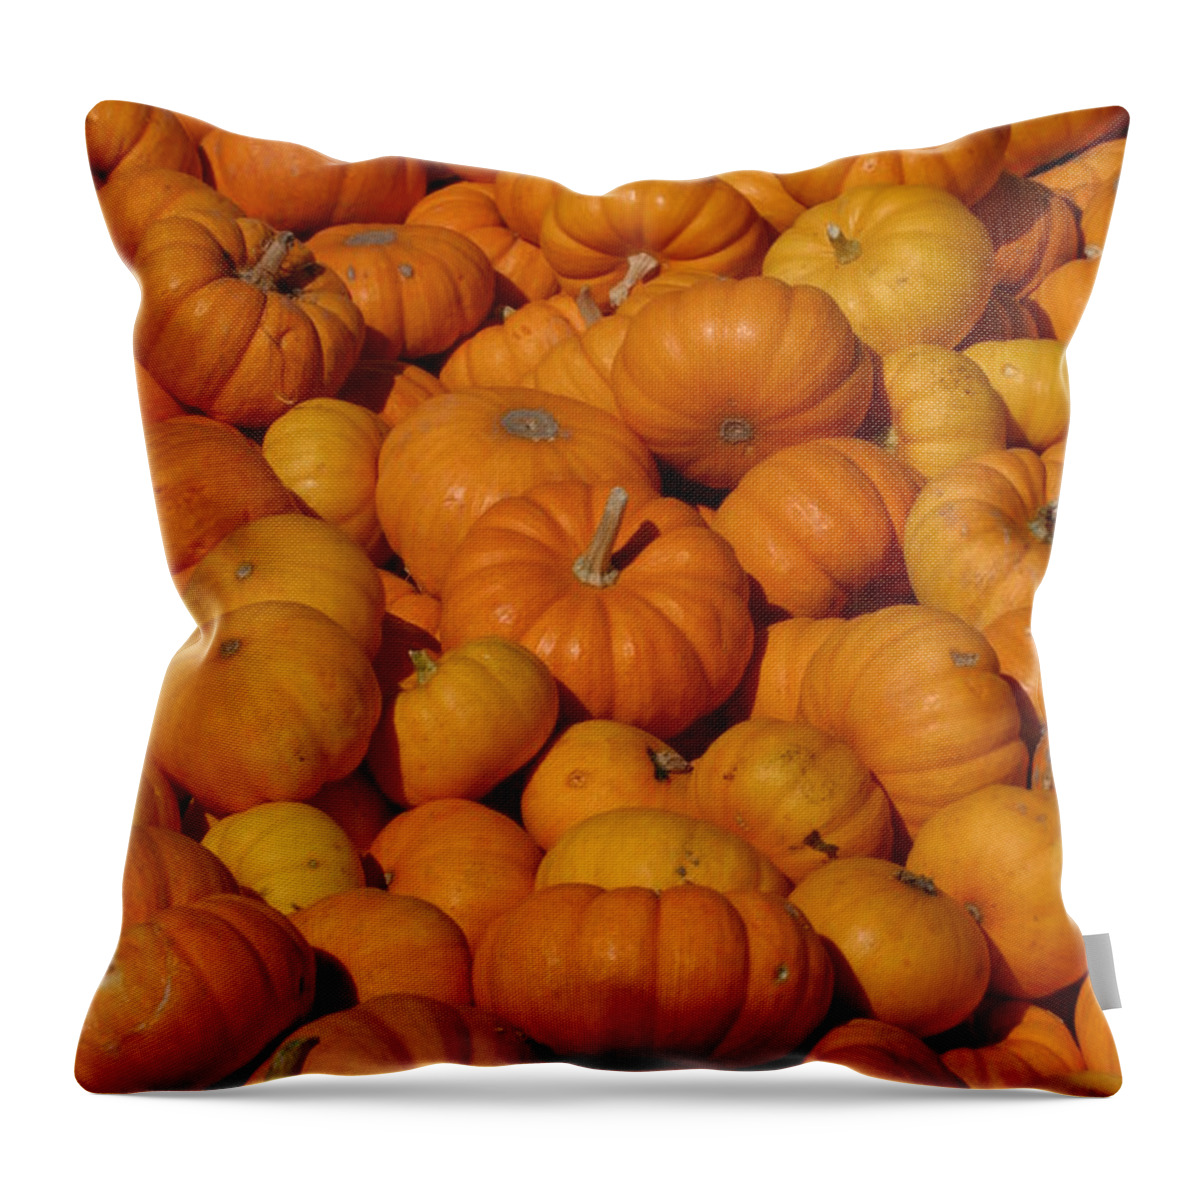 Orange Throw Pillow featuring the photograph Mini Pumpkins by Jeff Floyd